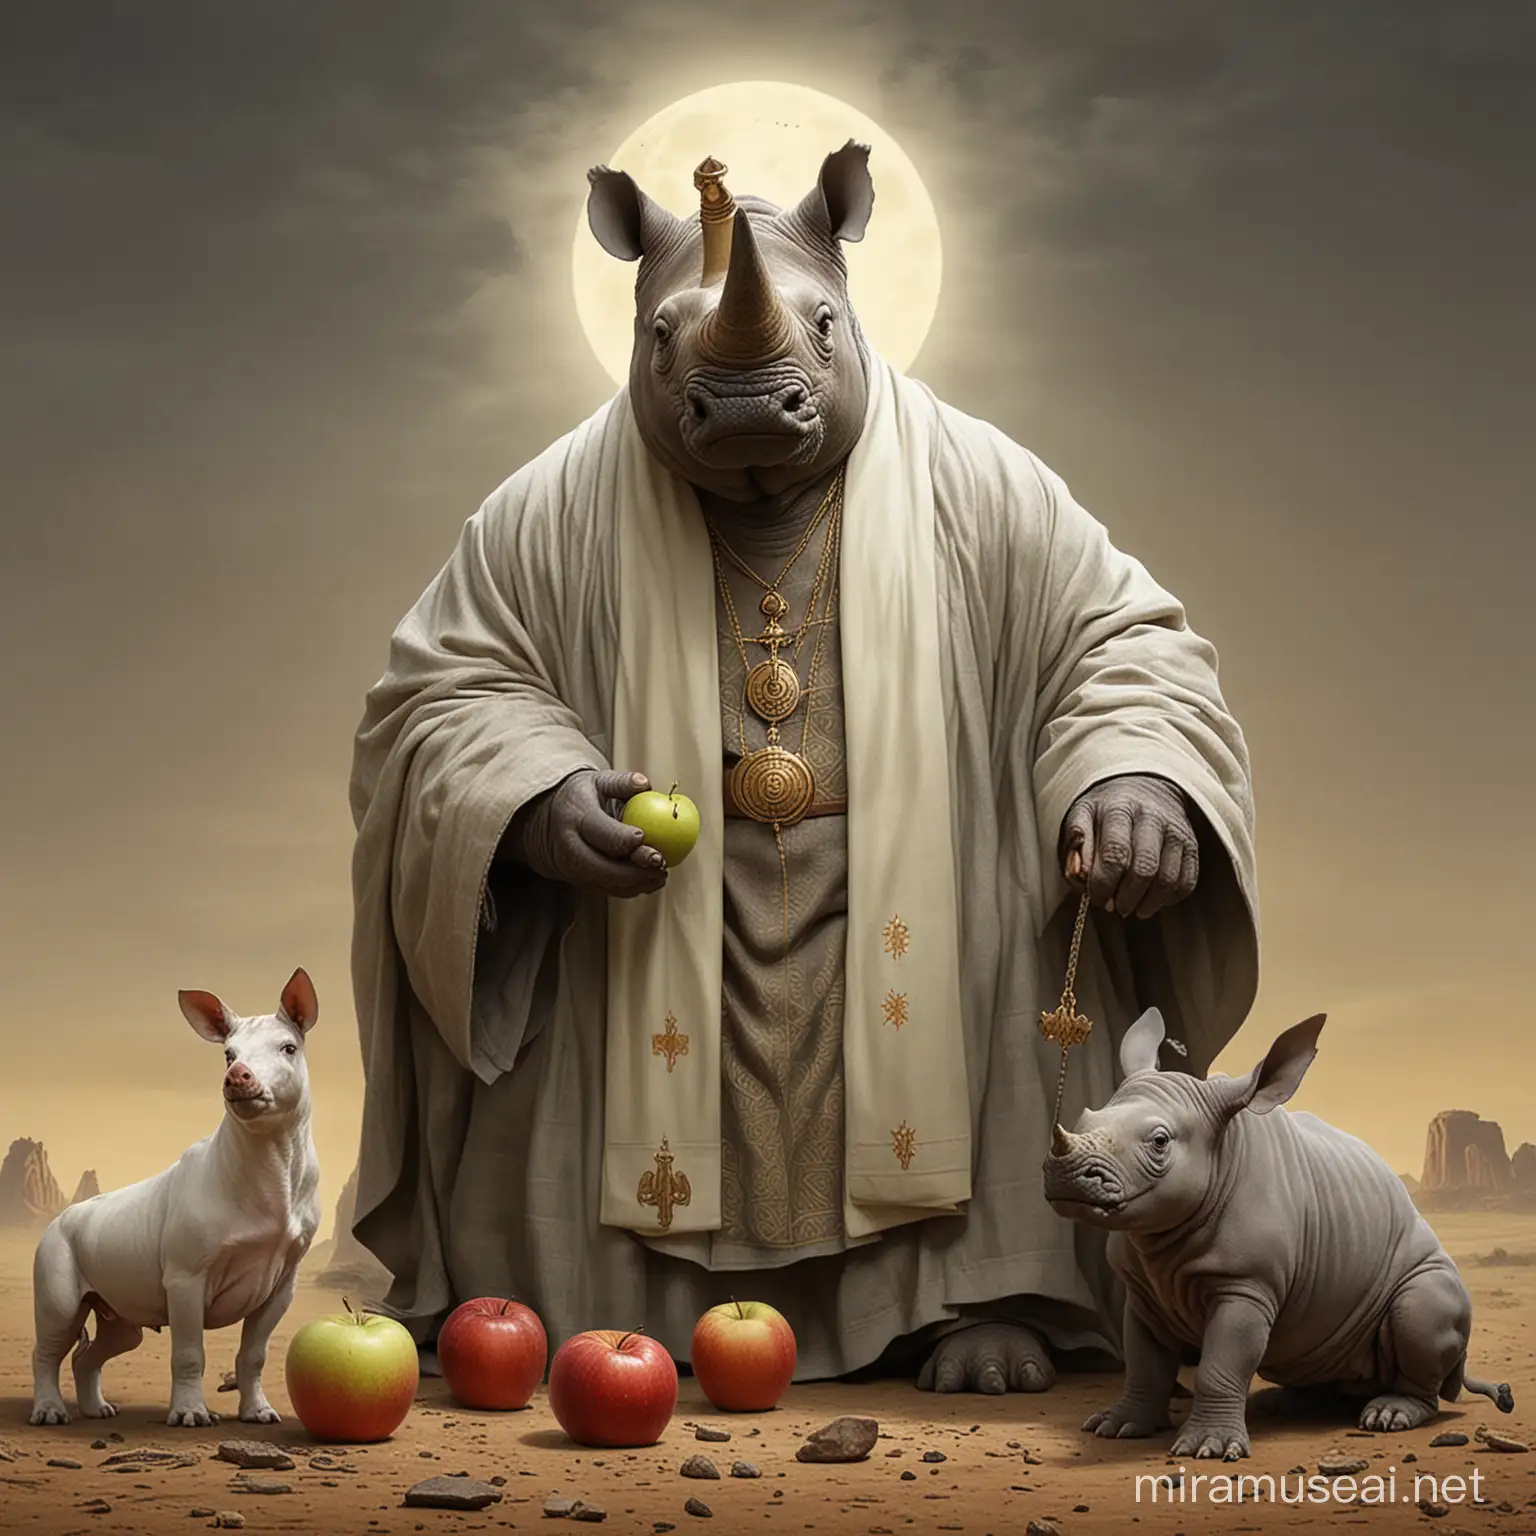 Majestic Rhino Blessing with Priest and Faithful Dog Offering Apples